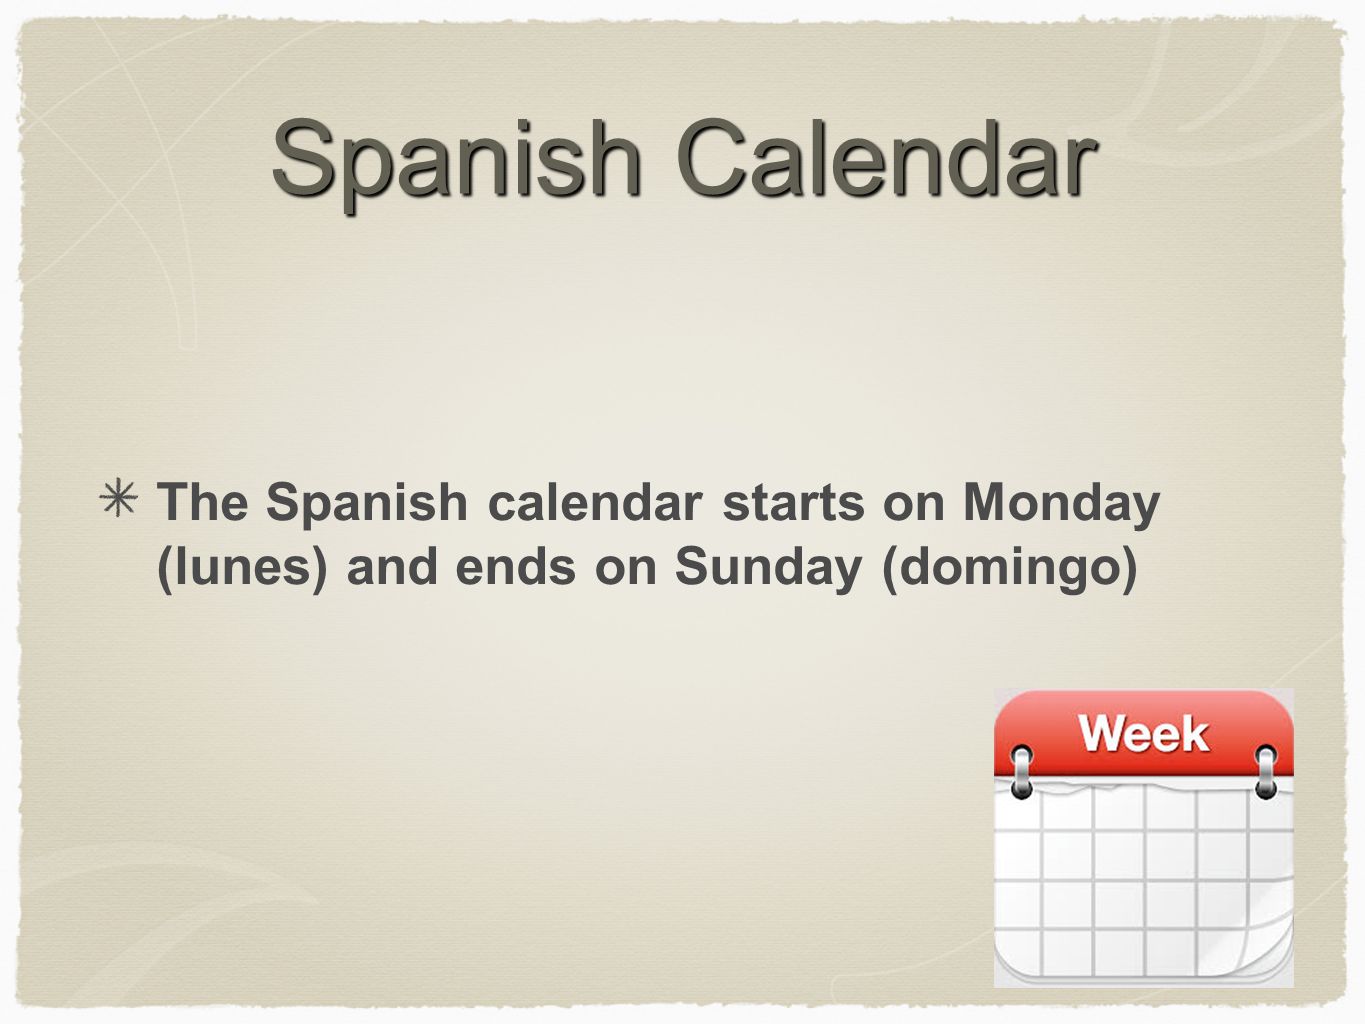 Days Months And Dates Spanish Calendar The Spanish Calendar Starts On Monday Lunes And Ends On Sunday Domingo Ppt Download